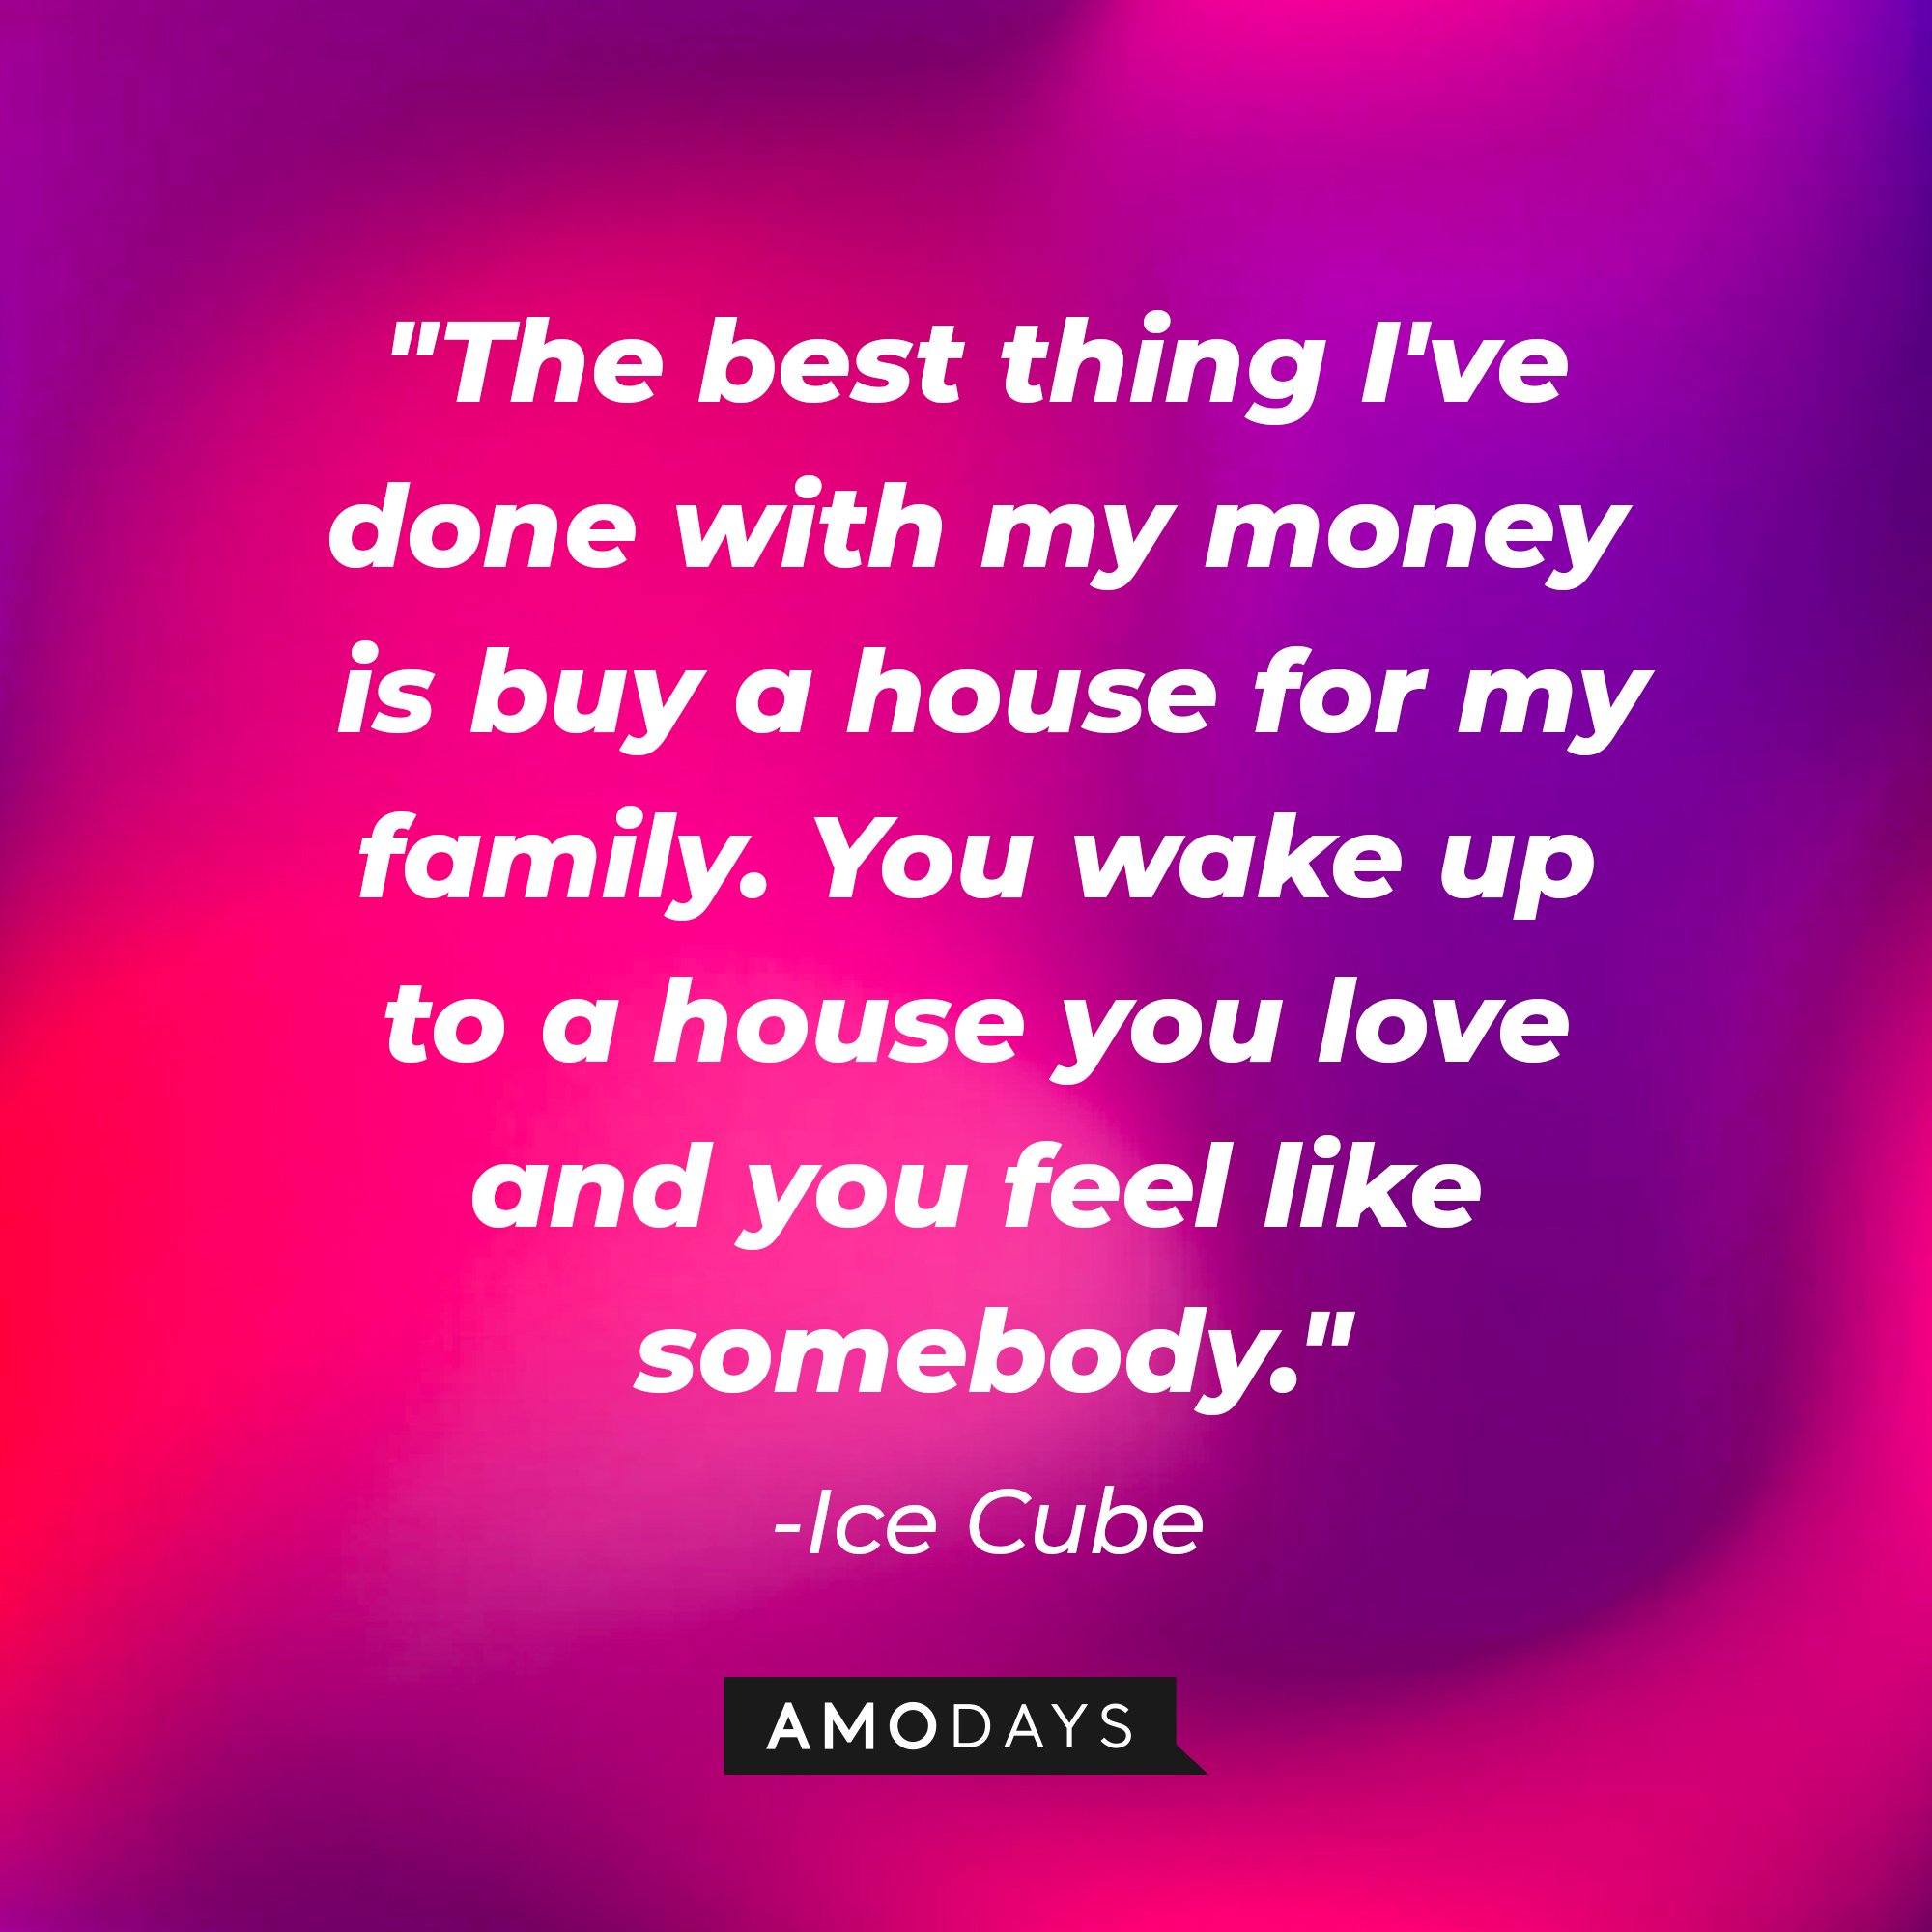 Ice Cube's quote: "The best thing I've done with my money is buy a house for my family. You wake up to a house you love and you feel like somebody." — Ice Cube | Image: AmoDays